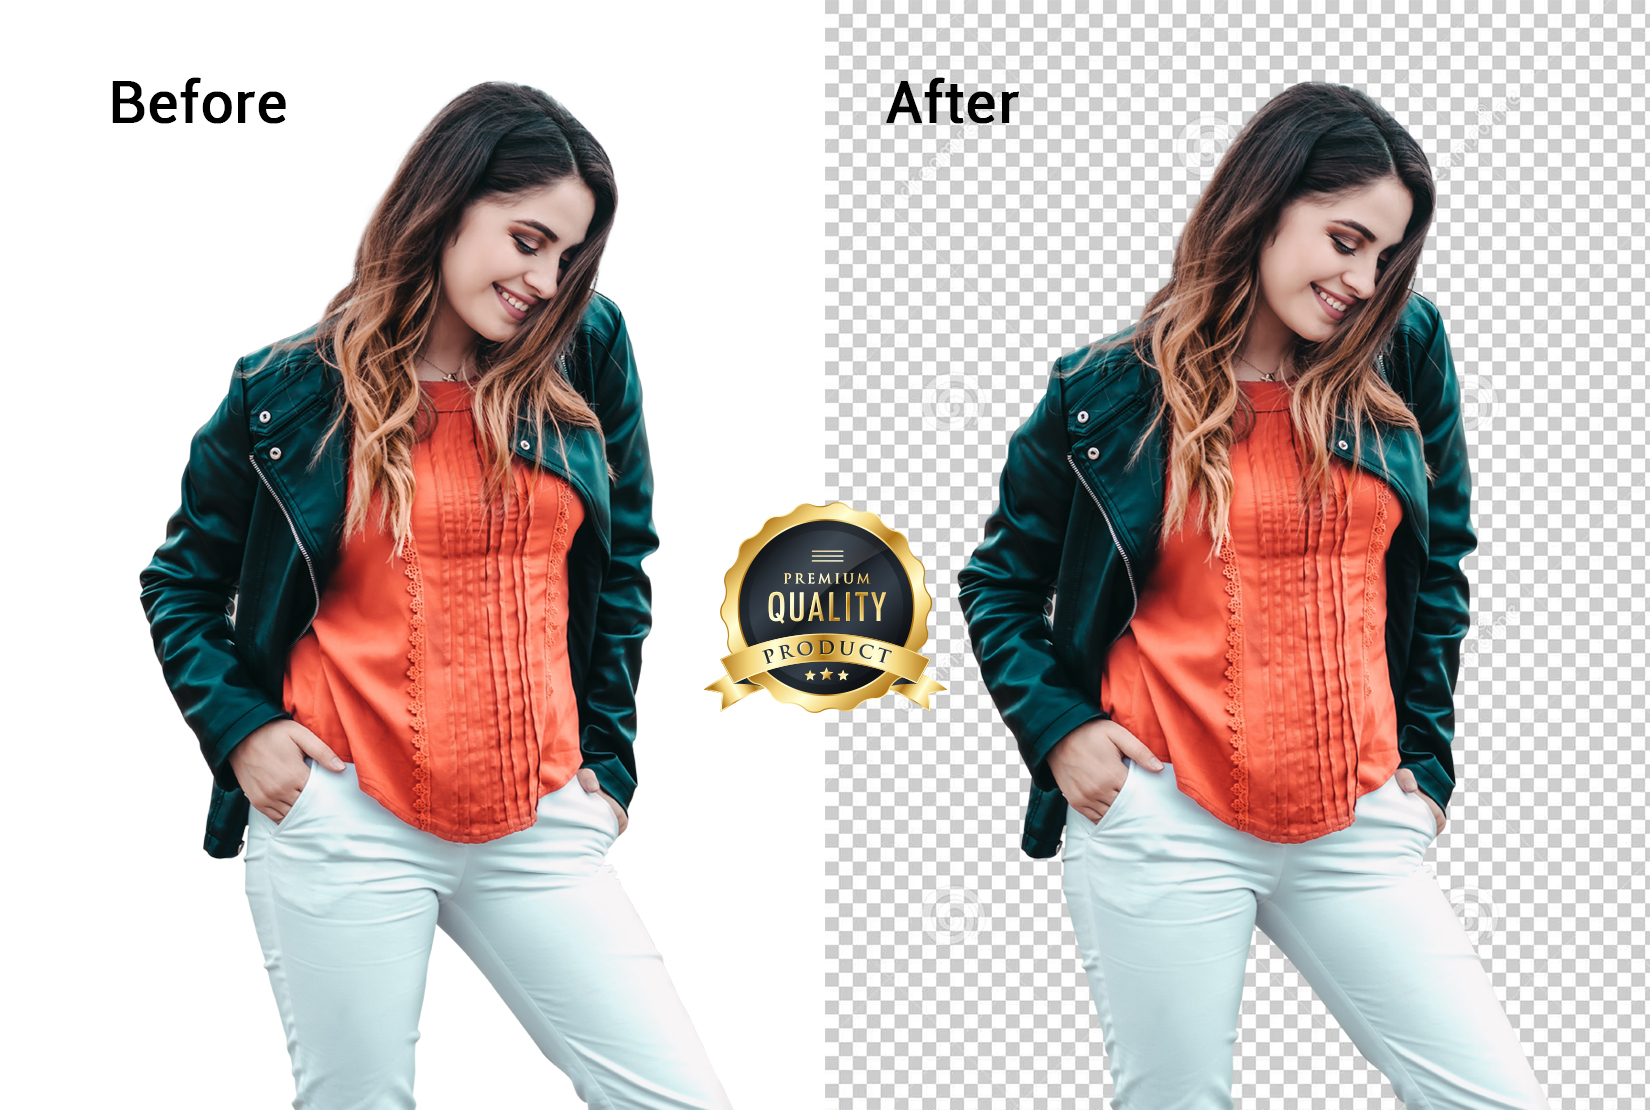 I will provide Background Removal service in 24 hours for $1 - SEOClerks